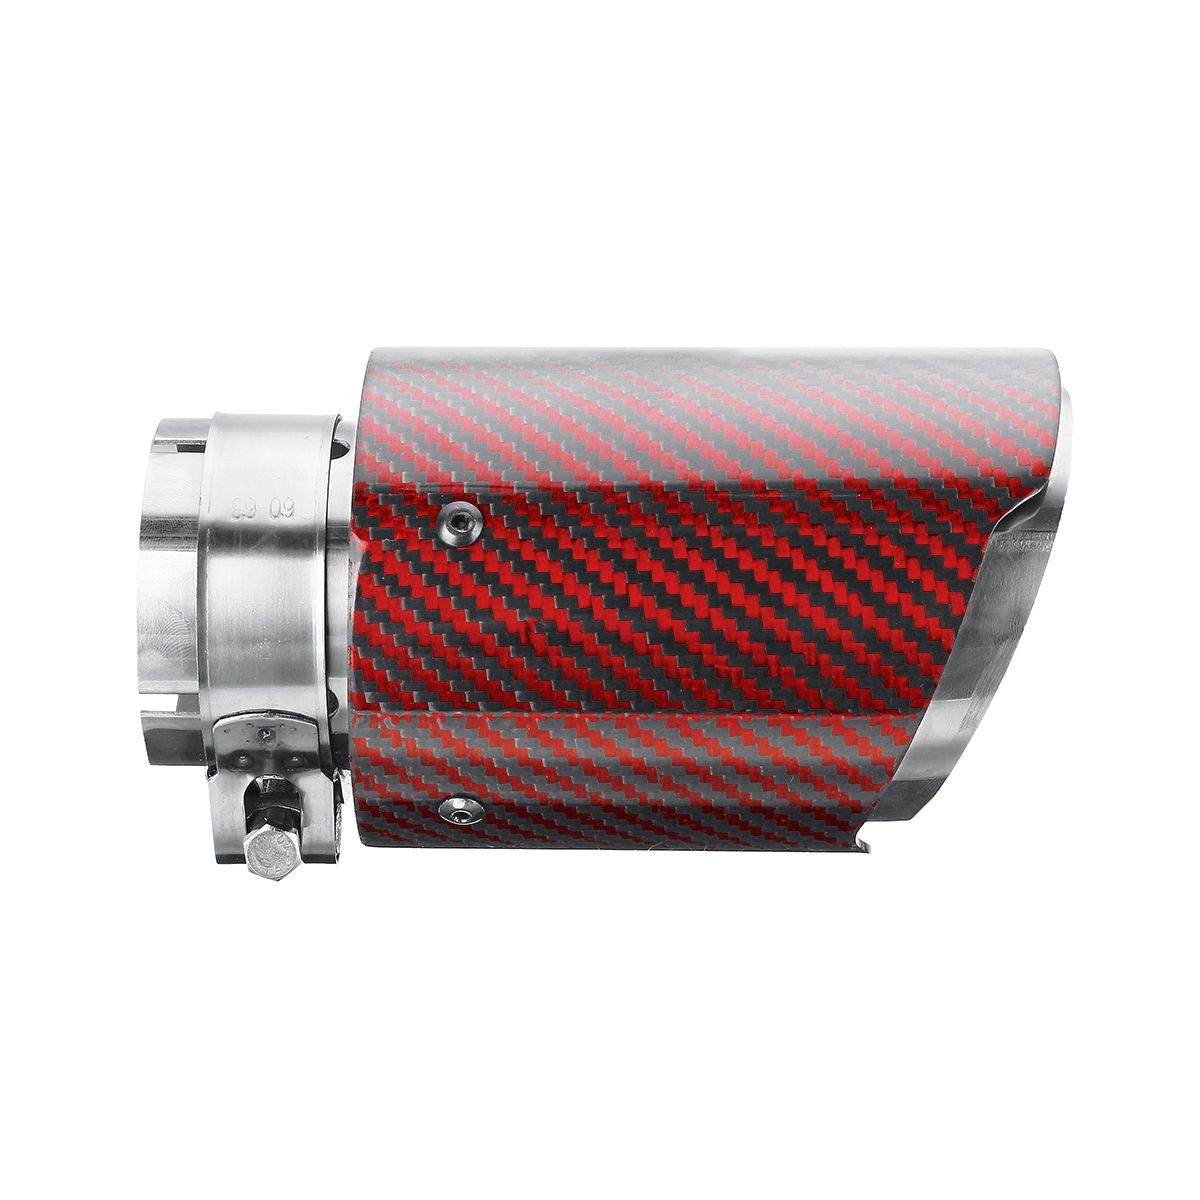 63MM-Universal-Real-Glossy-Carbon-Fiber-Red-Exhaust-Muffler-Tip-End-Tail-Pipe-1428008